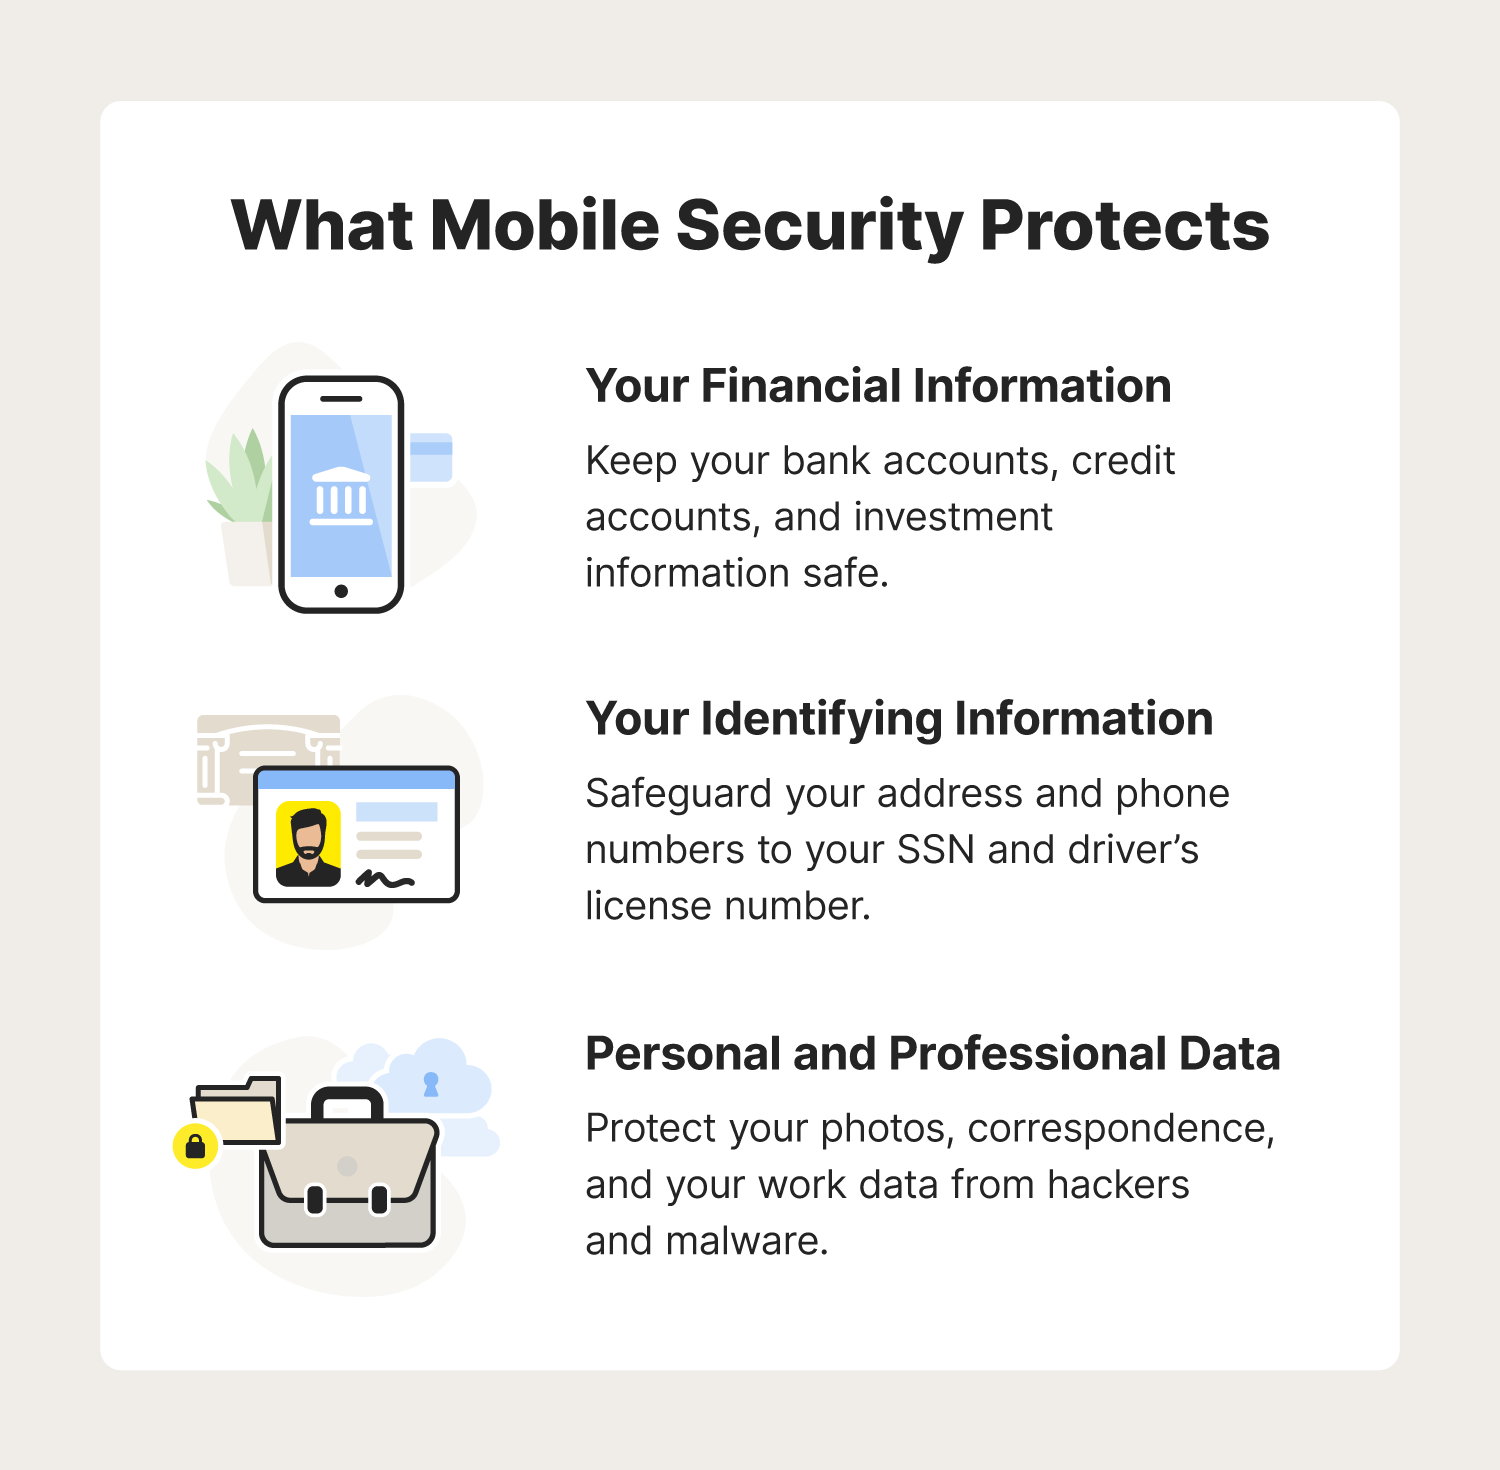 Illustrated chart providing examples of what mobile security protects—financial, identifying, and personal data.